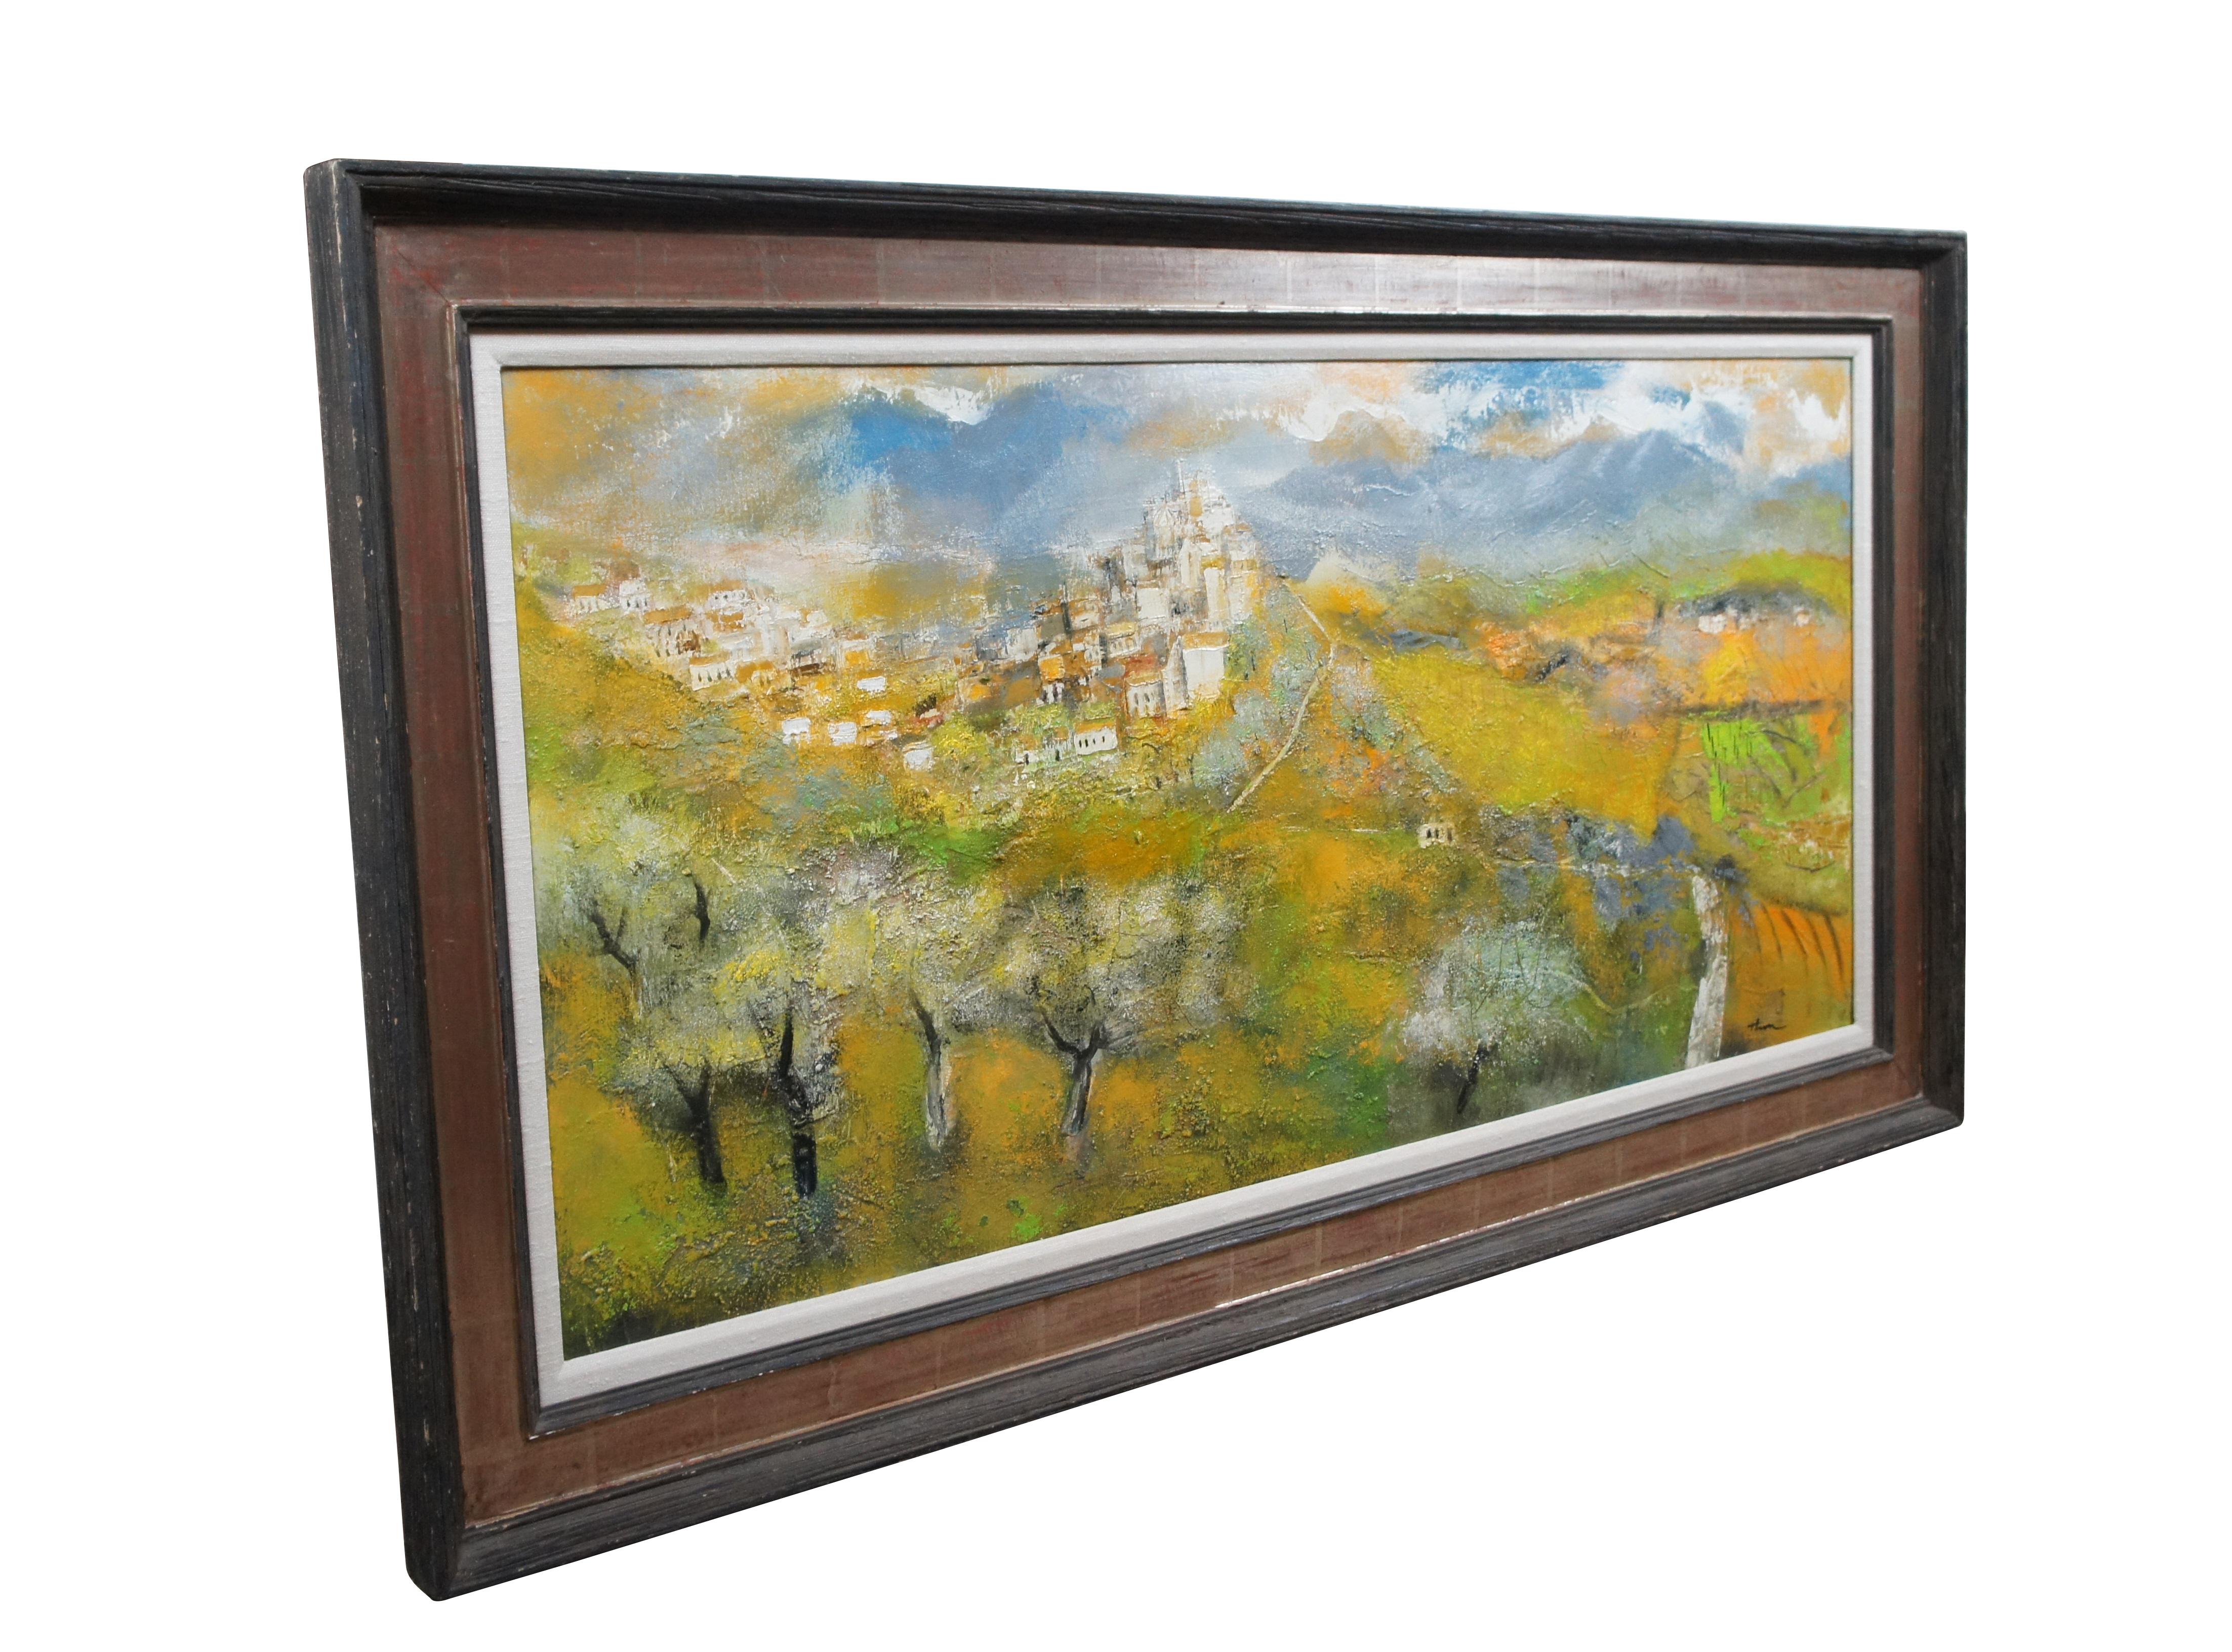 Mid 20th century oil on board landscape painting by William Thon titled 